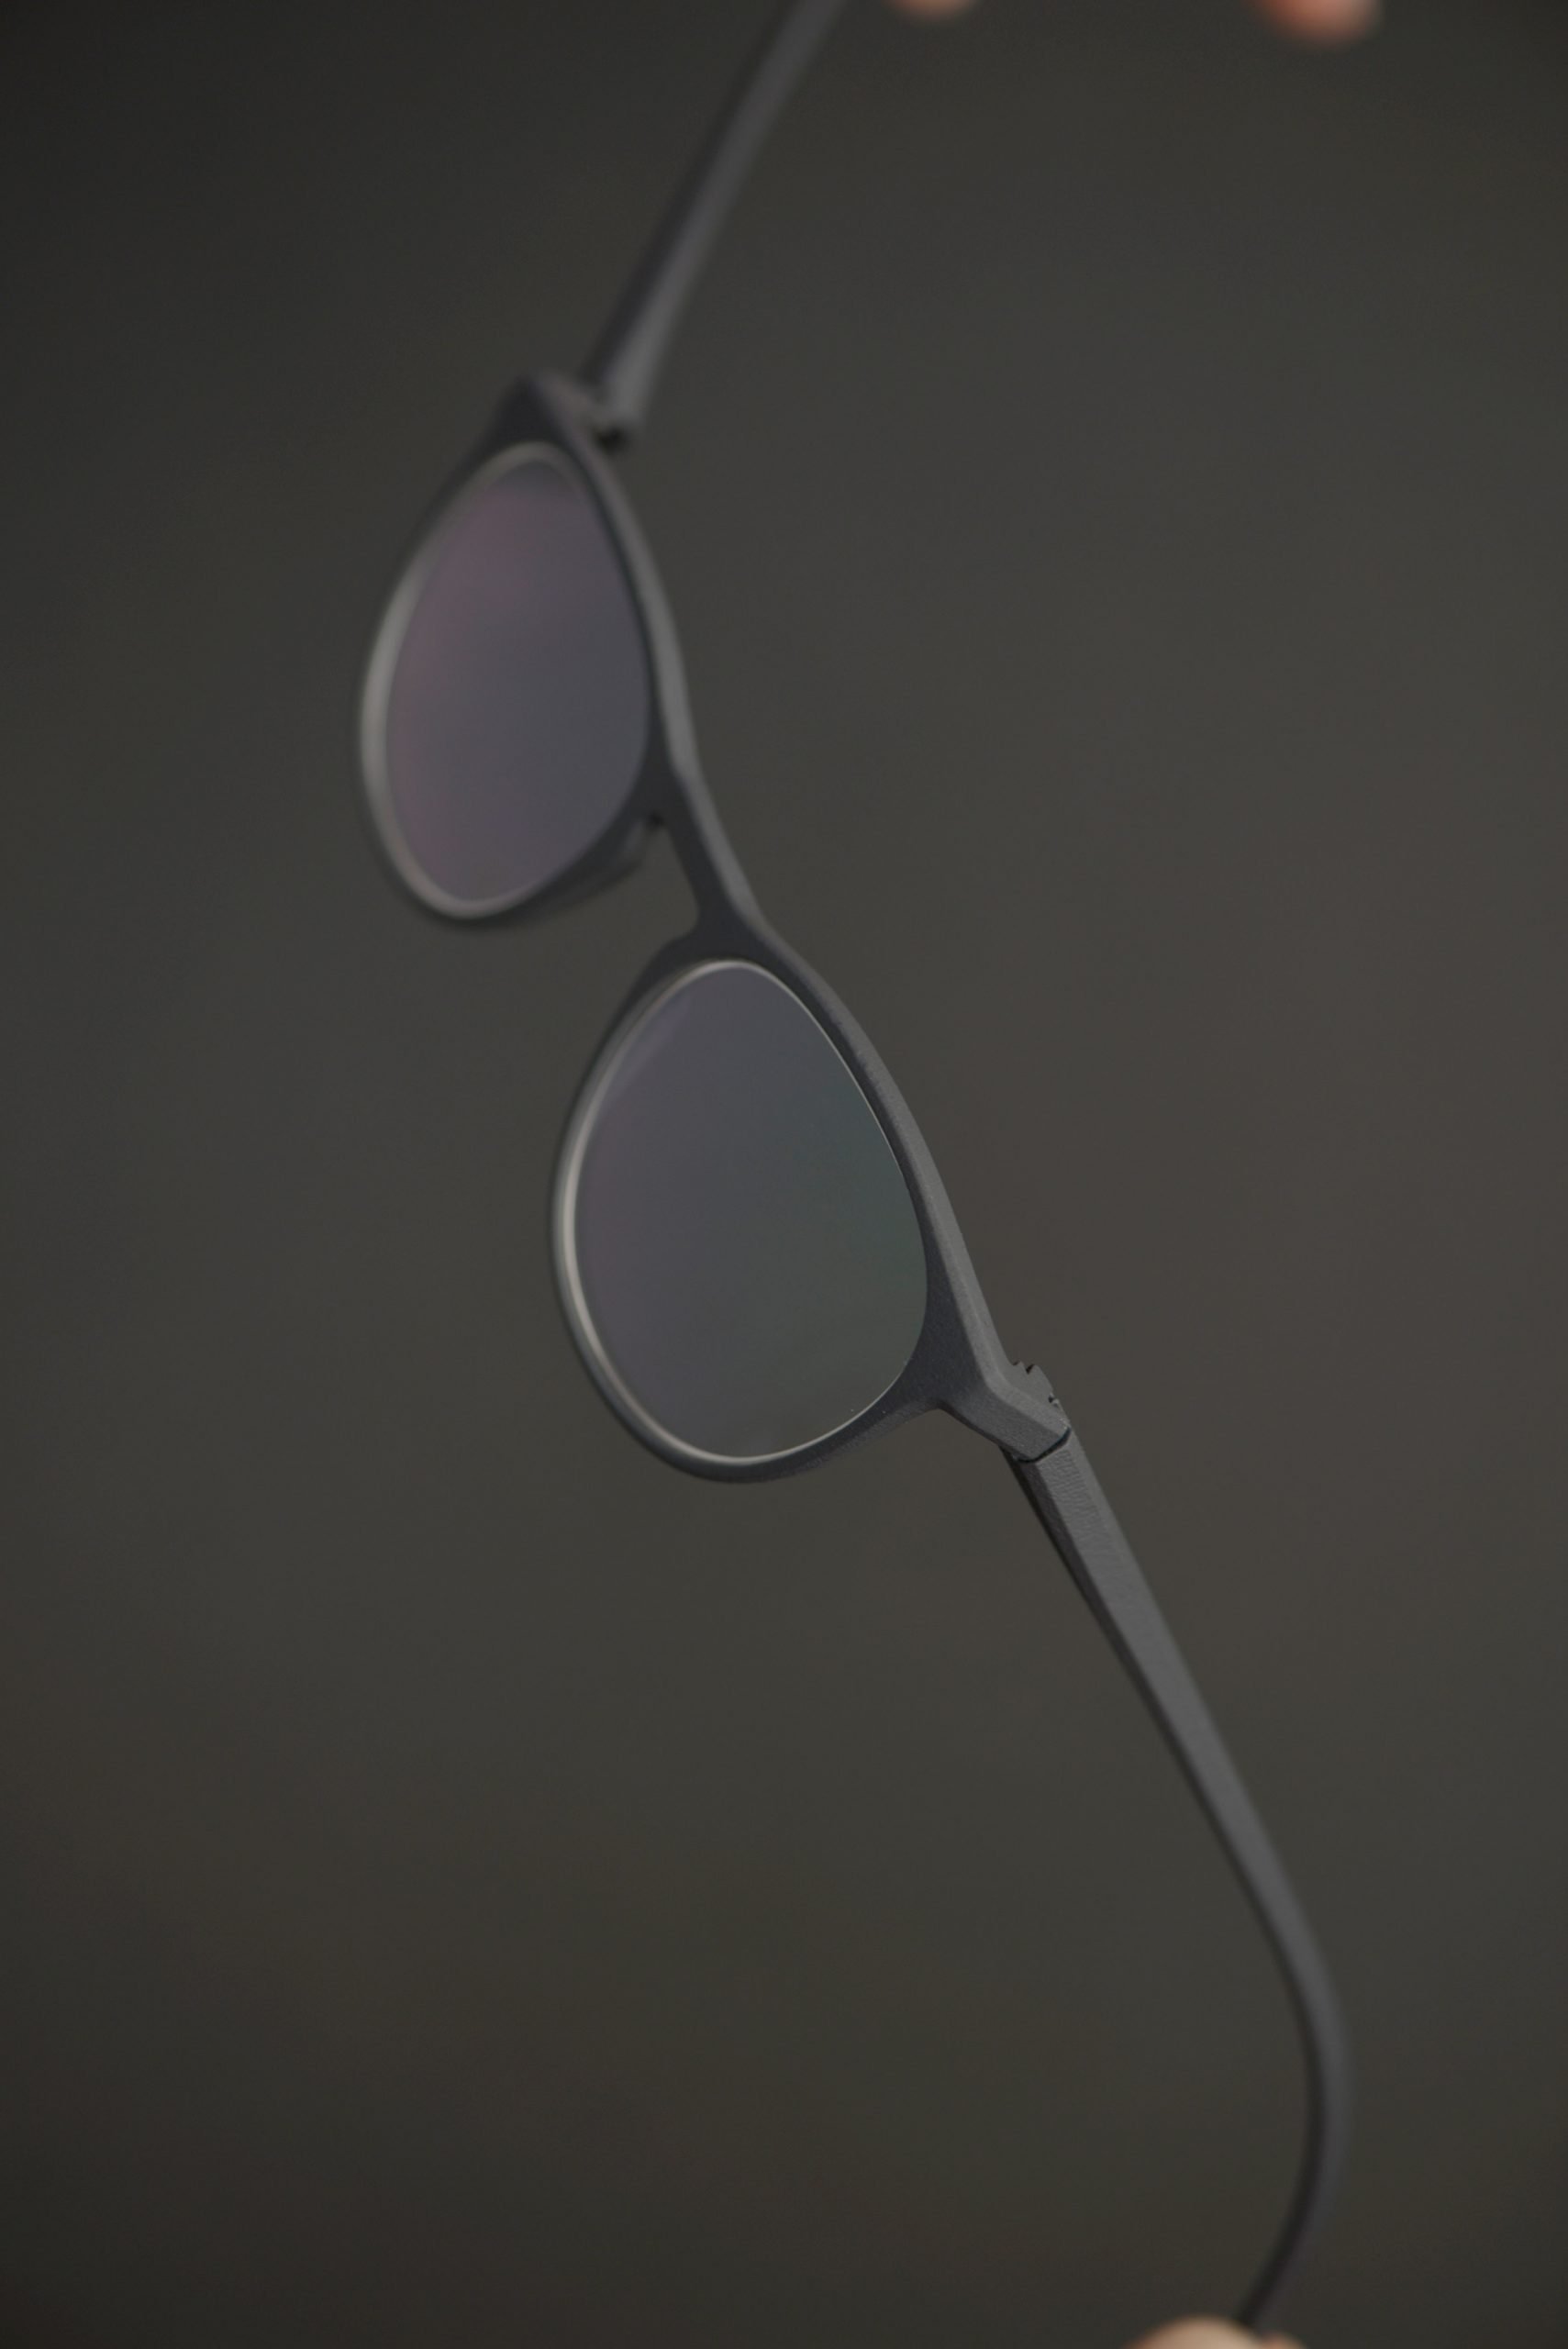 Substance glasses by Rolf have a Flexlock hinge